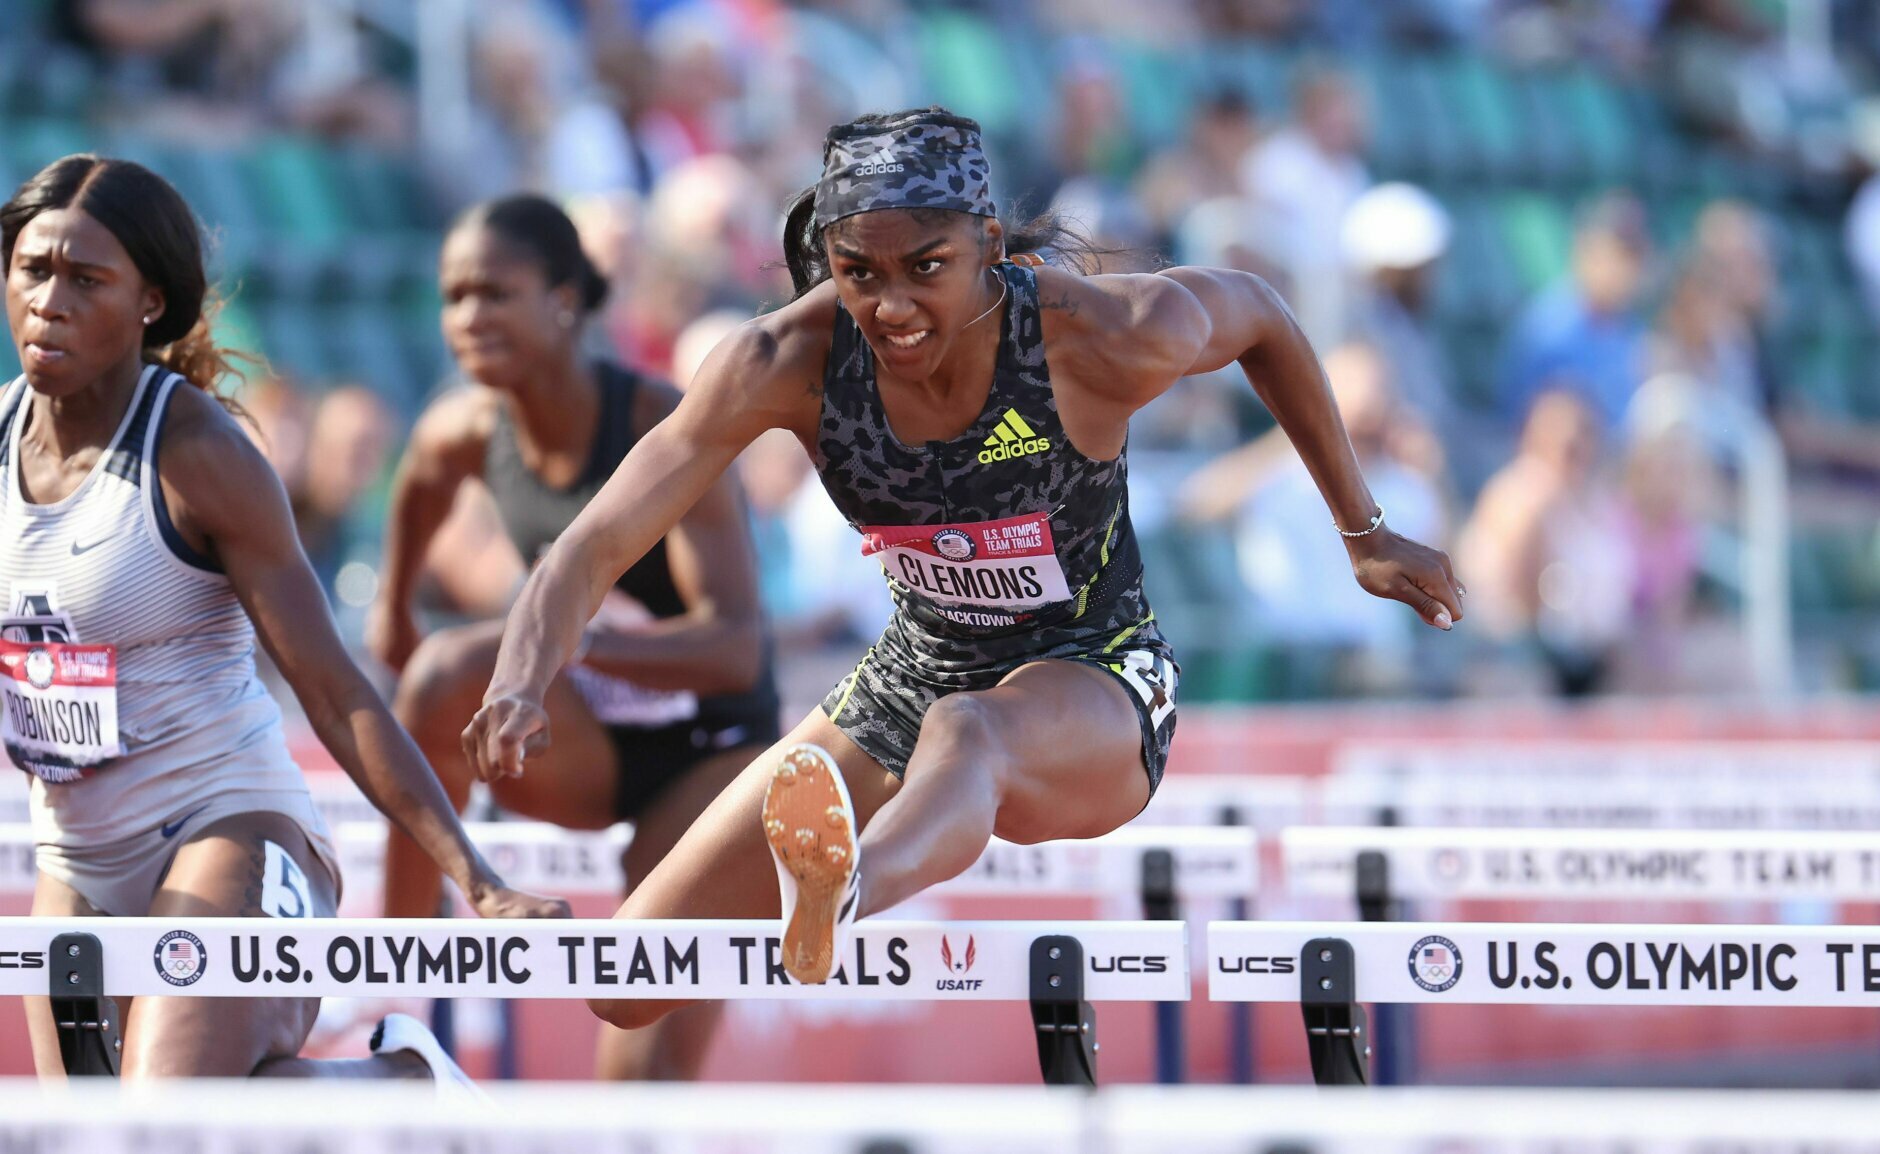 <p><strong>Christina Clemons (Waldorf, Maryland) — Track and Field</strong></p>
<p><strong>Notable facts:</strong> The Westlake High School grad went on to have a record-setting collegiate career at Ohio State, where she won two NCAA championships and 10 Big Ten conference championships. Now, <a href="https://www.nbcsports.com/washington/five-things-know-about-olympic-track-and-field-star-christina-clemons" target="_blank" rel="noopener">after overcoming several obstacles</a>, she&#8217;s headed to Tokyo for her first Olympics. Oh, by the way … her husband, Kyle Clemons, brought home gold from the Summer Games in Rio, winning the 4&#215;400 meter relay.</p>
<p><strong>Competition:</strong> 100-meter hurdles —  July 31-Aug. 2</p>
<p><strong>Results:</strong> fourth in Aug. 1 semifinal</p>
